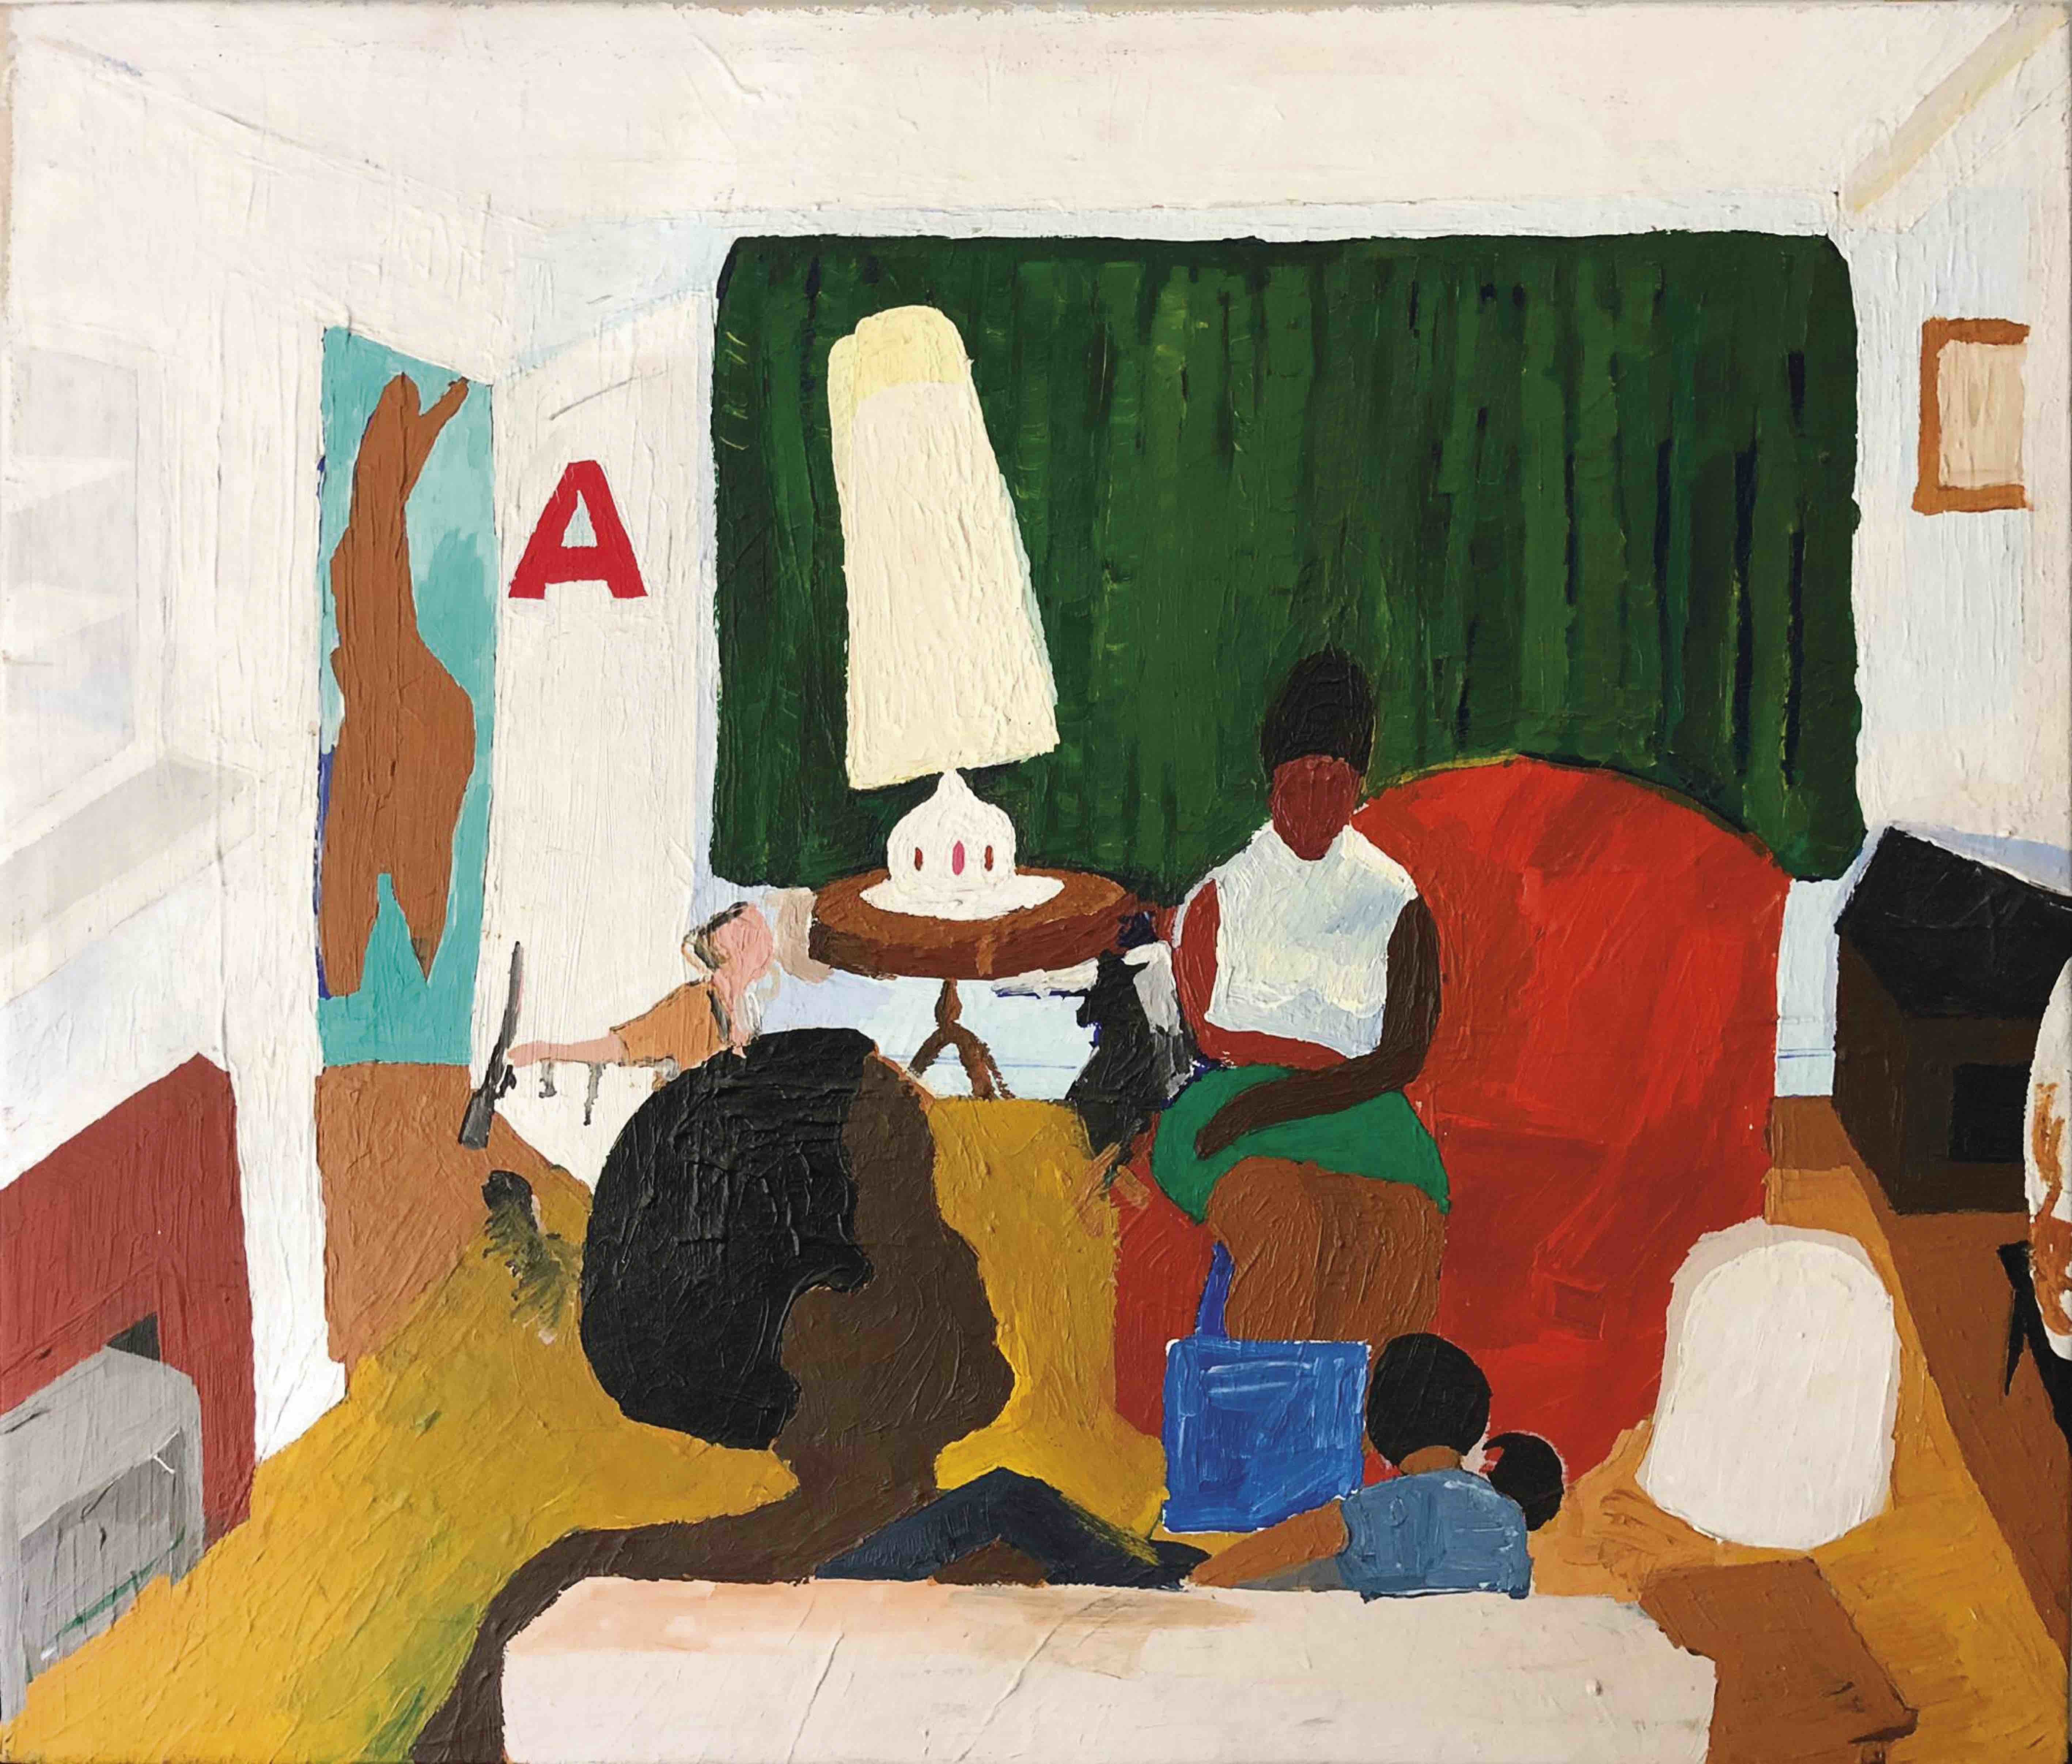 Henry Taylor Untitled (living room with Mama), 2004 Acrylic on canvas 67.3 x 77.5 cm (26.5 x 30.5 in) (HTA 1000) Private Collection © Henry Taylor